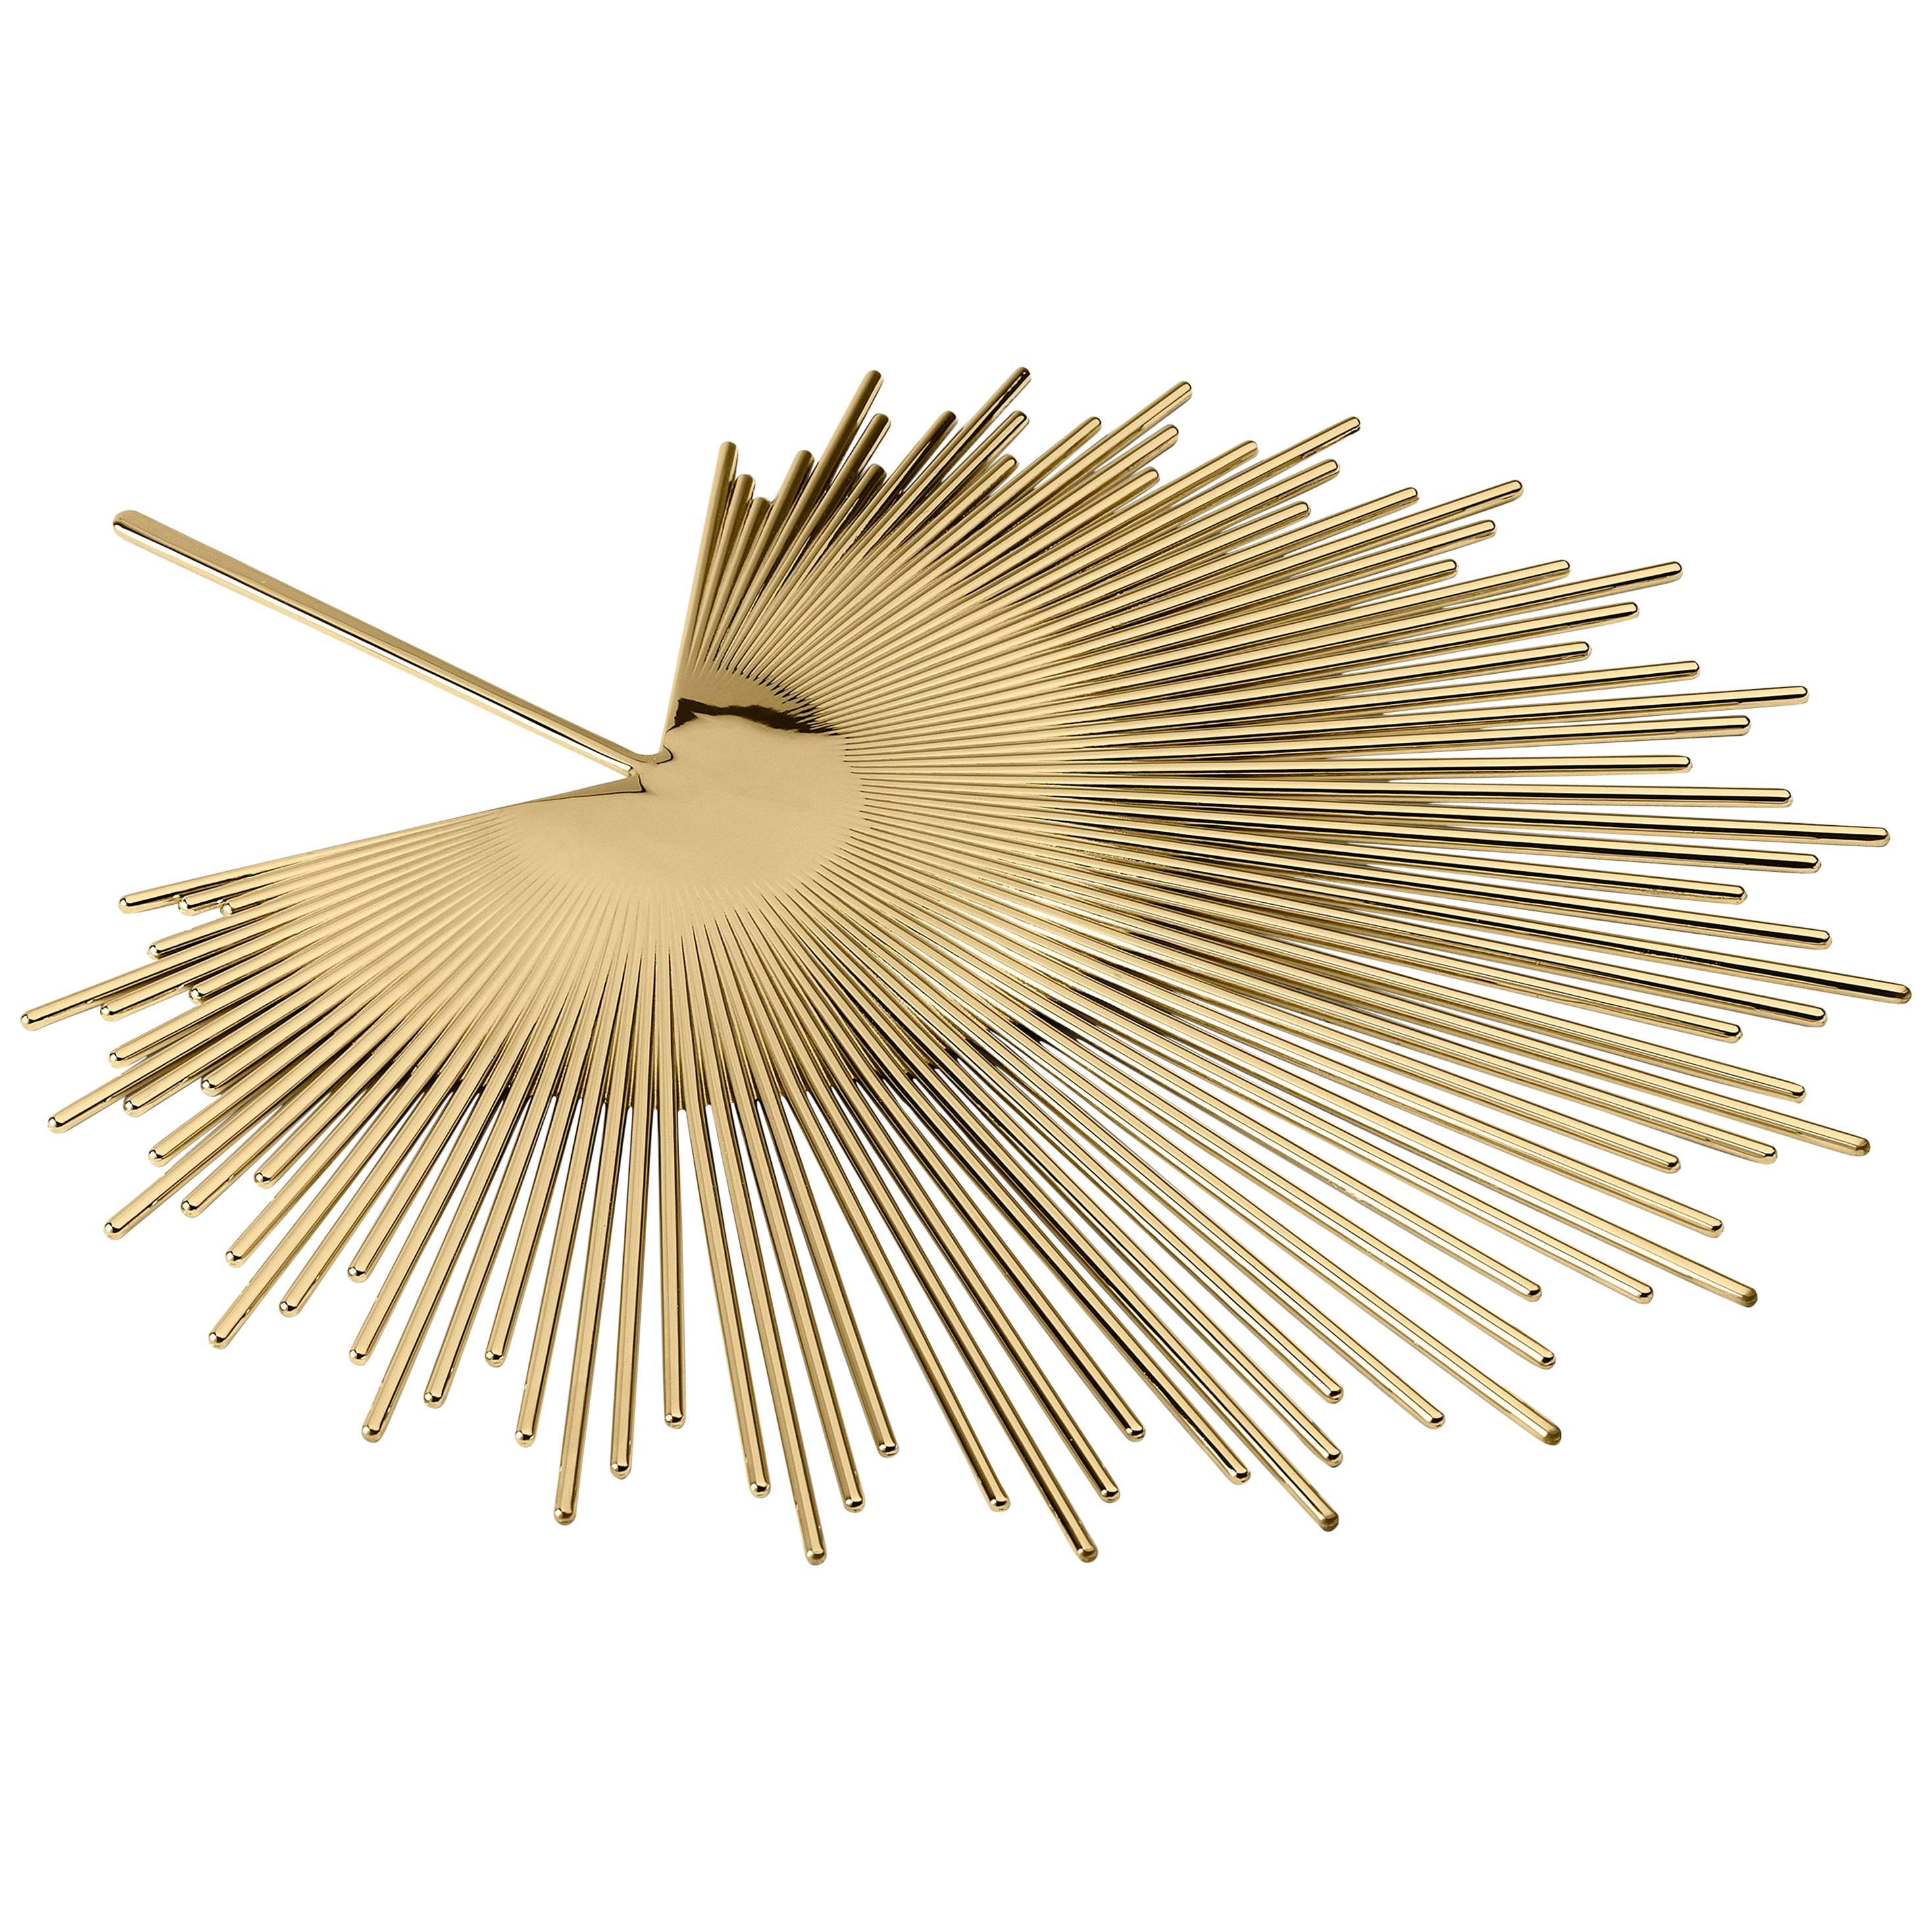 Ghidini 1961 Palm Tray in Polished Brass